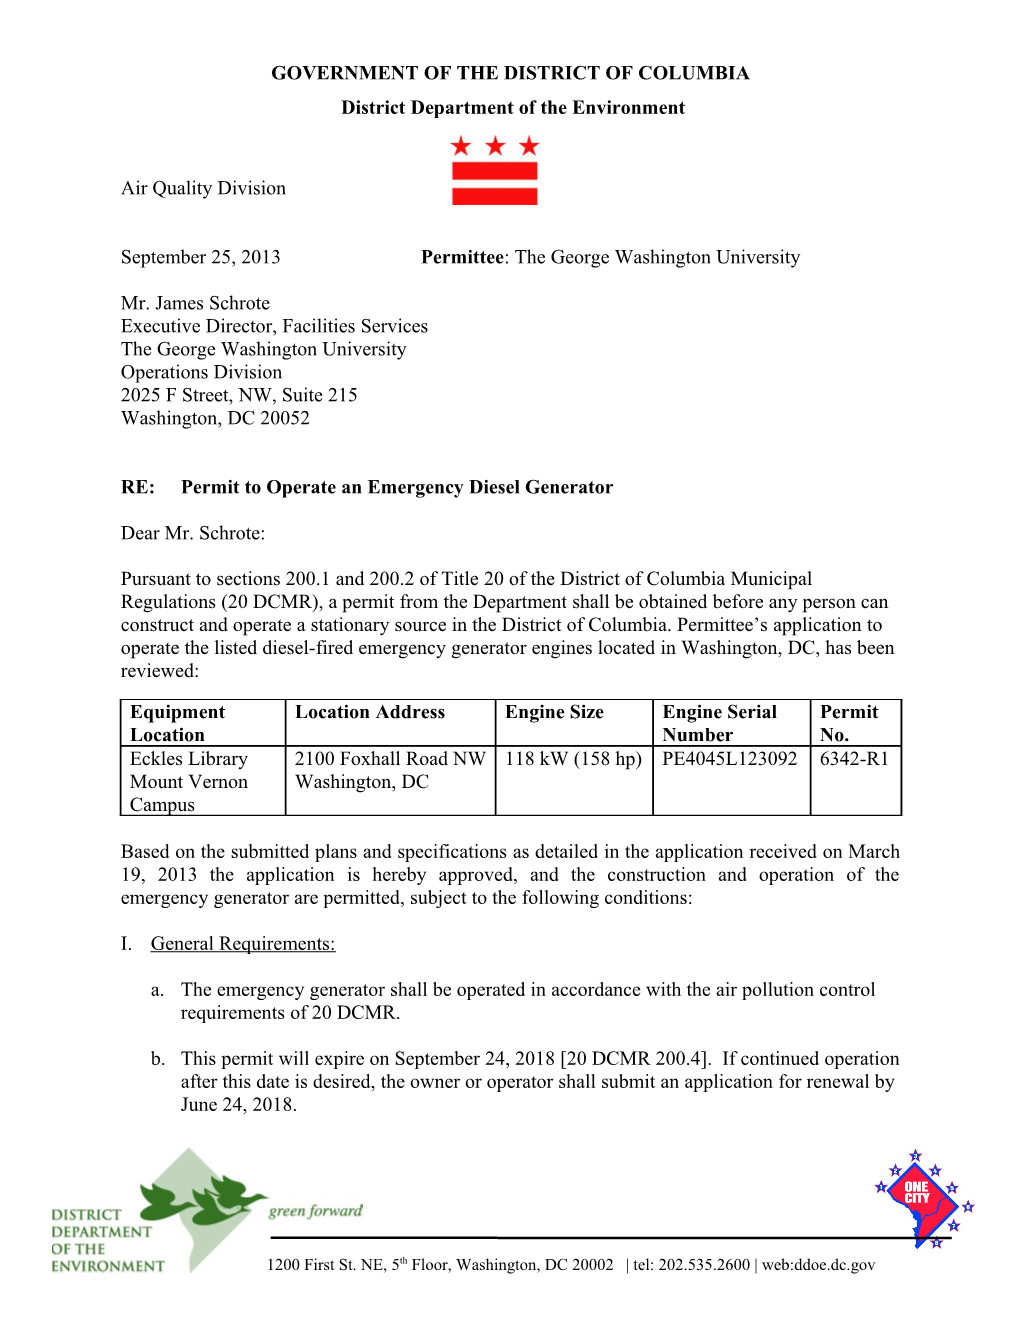 Permit #6342-R1 to Operate an Emergency Generator